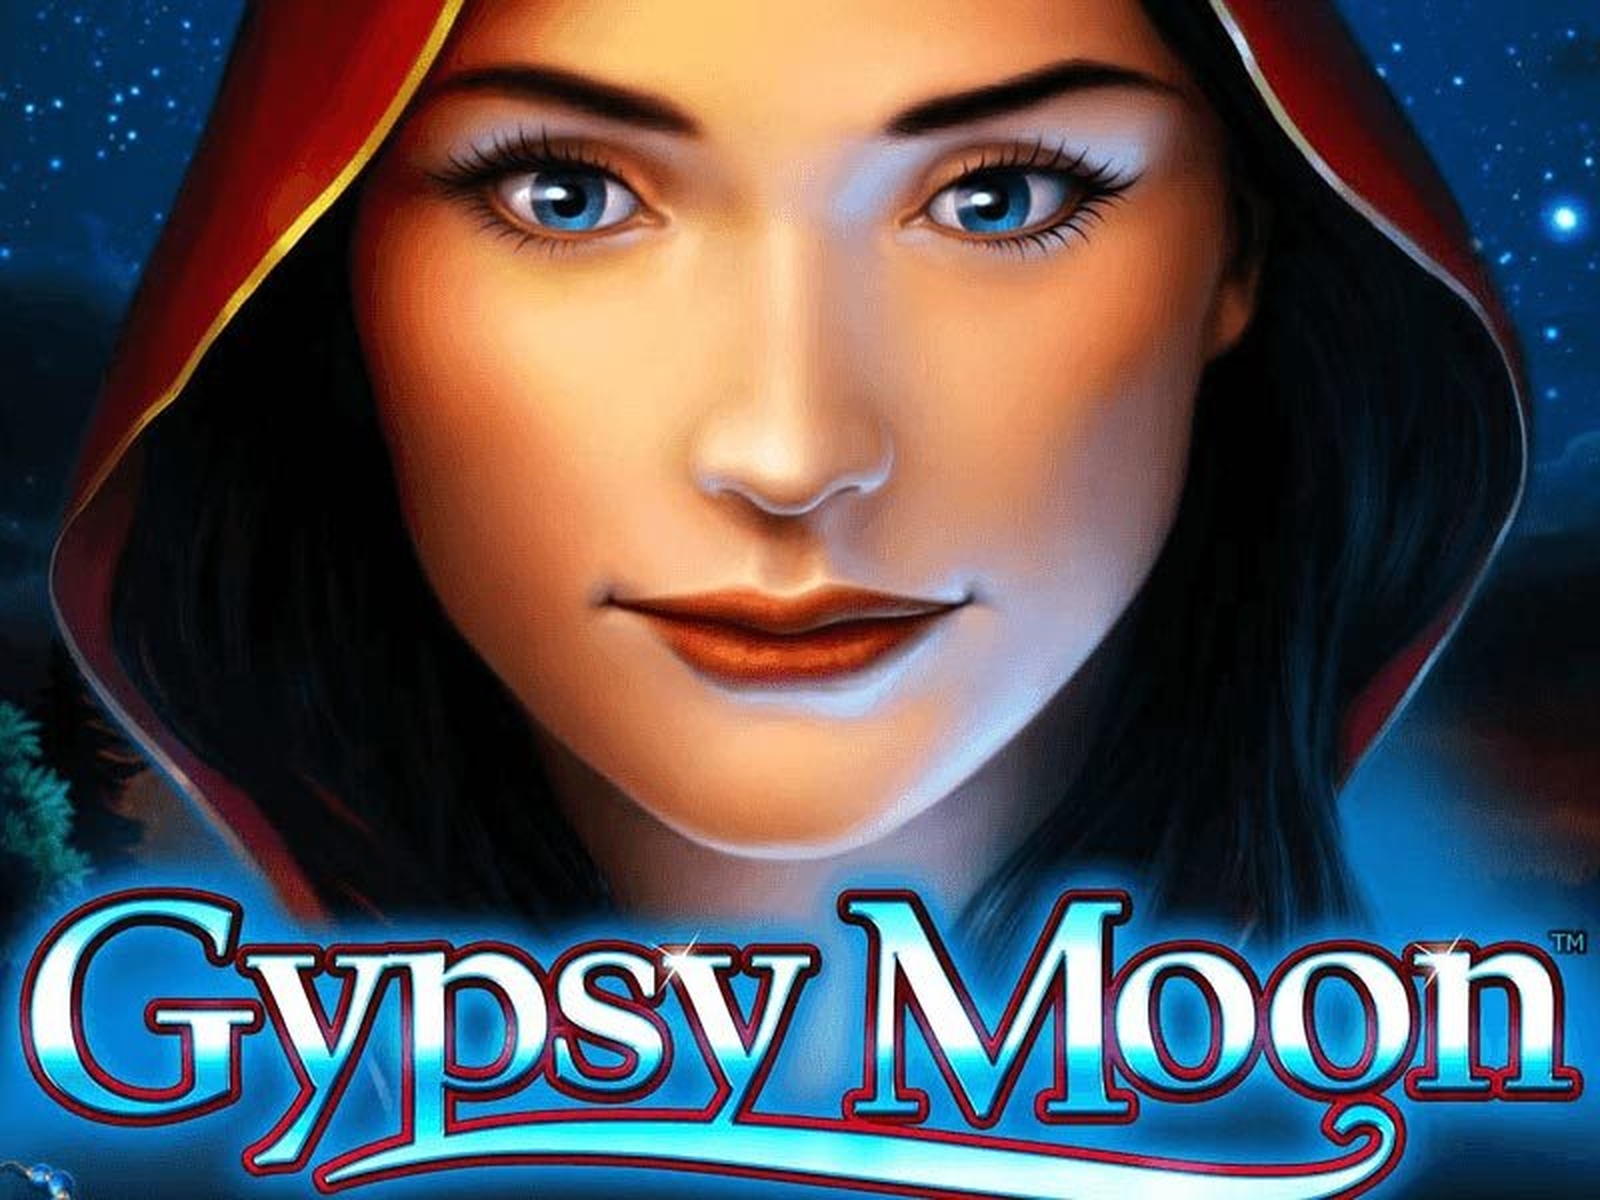 The Gypsy Moon Online Slot Demo Game by IGT